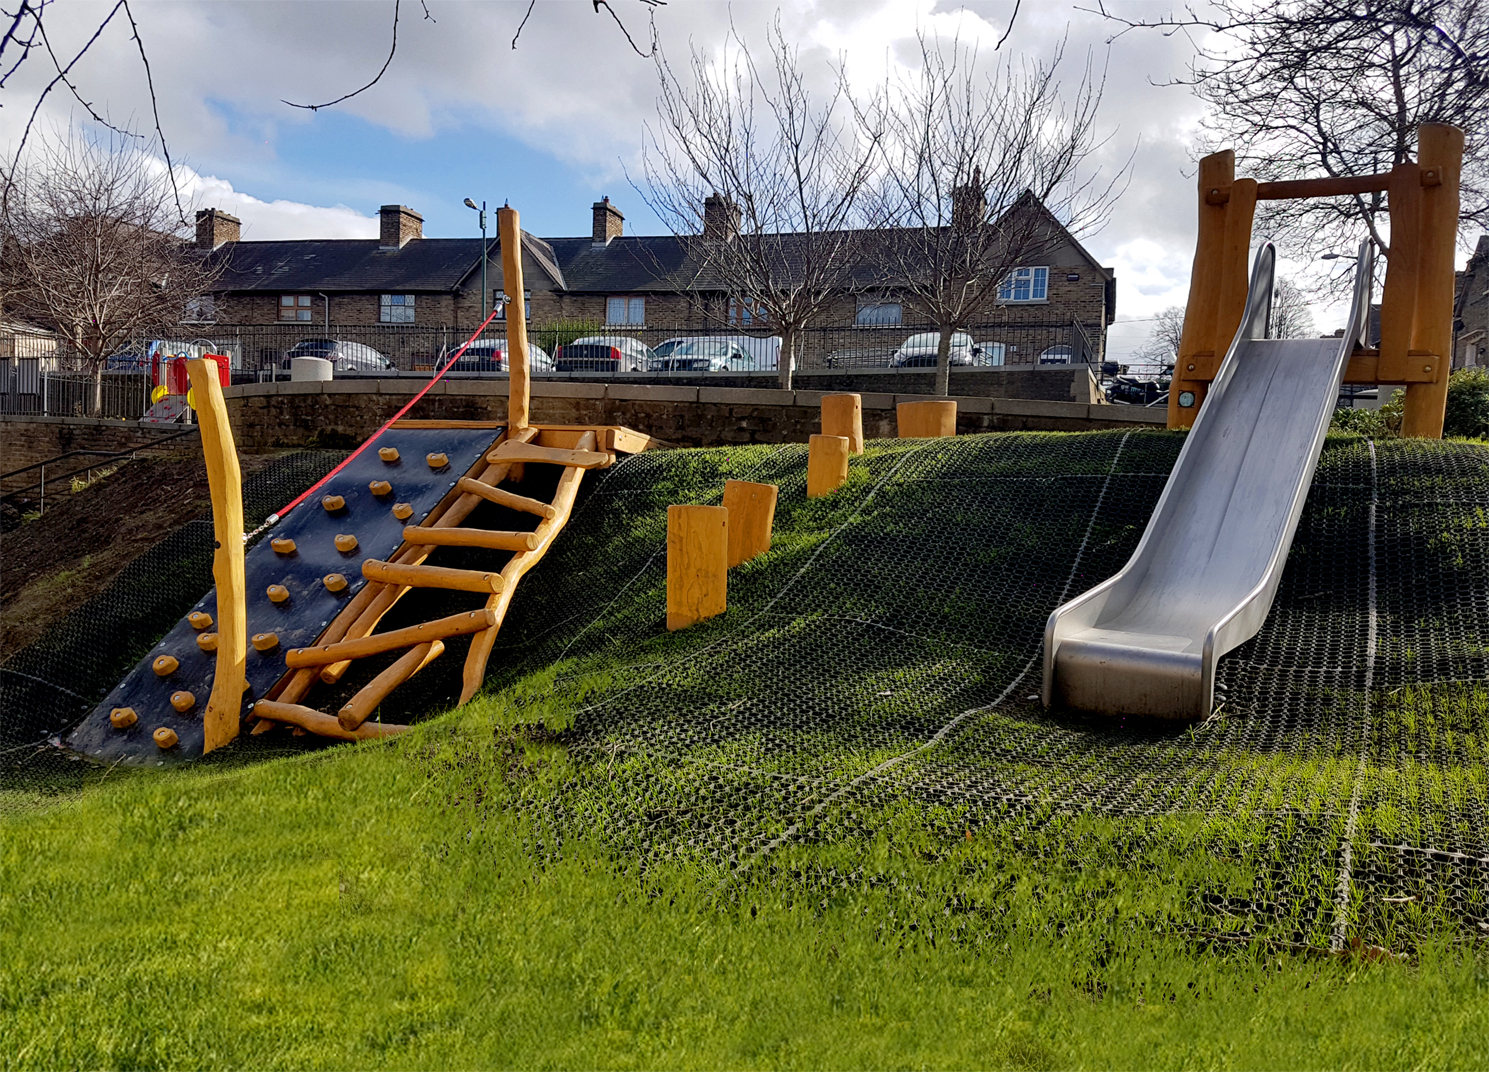 New Playground for Mount Brown in Dublin, located within the square.